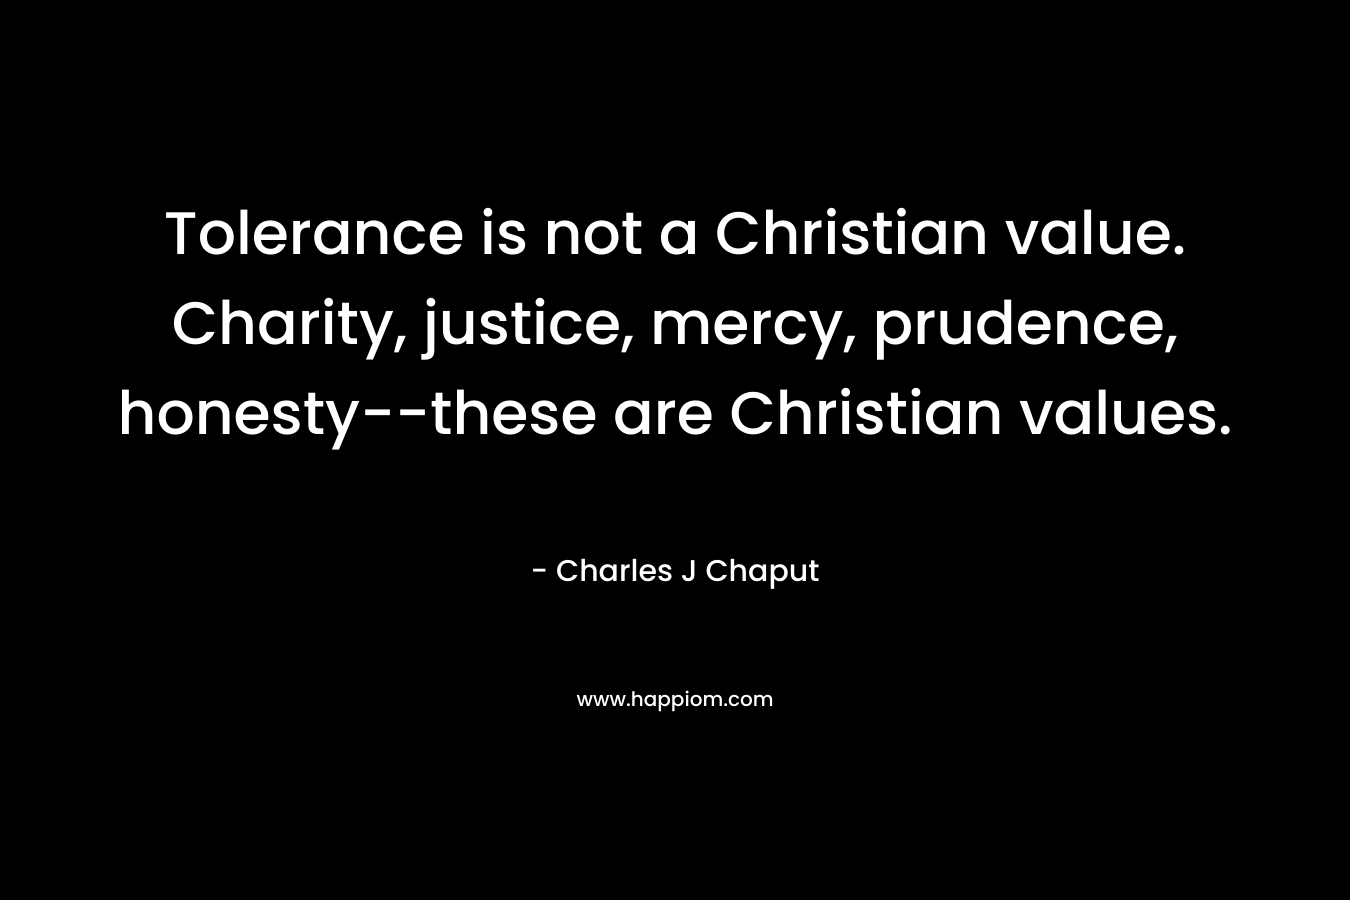 Tolerance is not a Christian value. Charity, justice, mercy, prudence, honesty--these are Christian values.